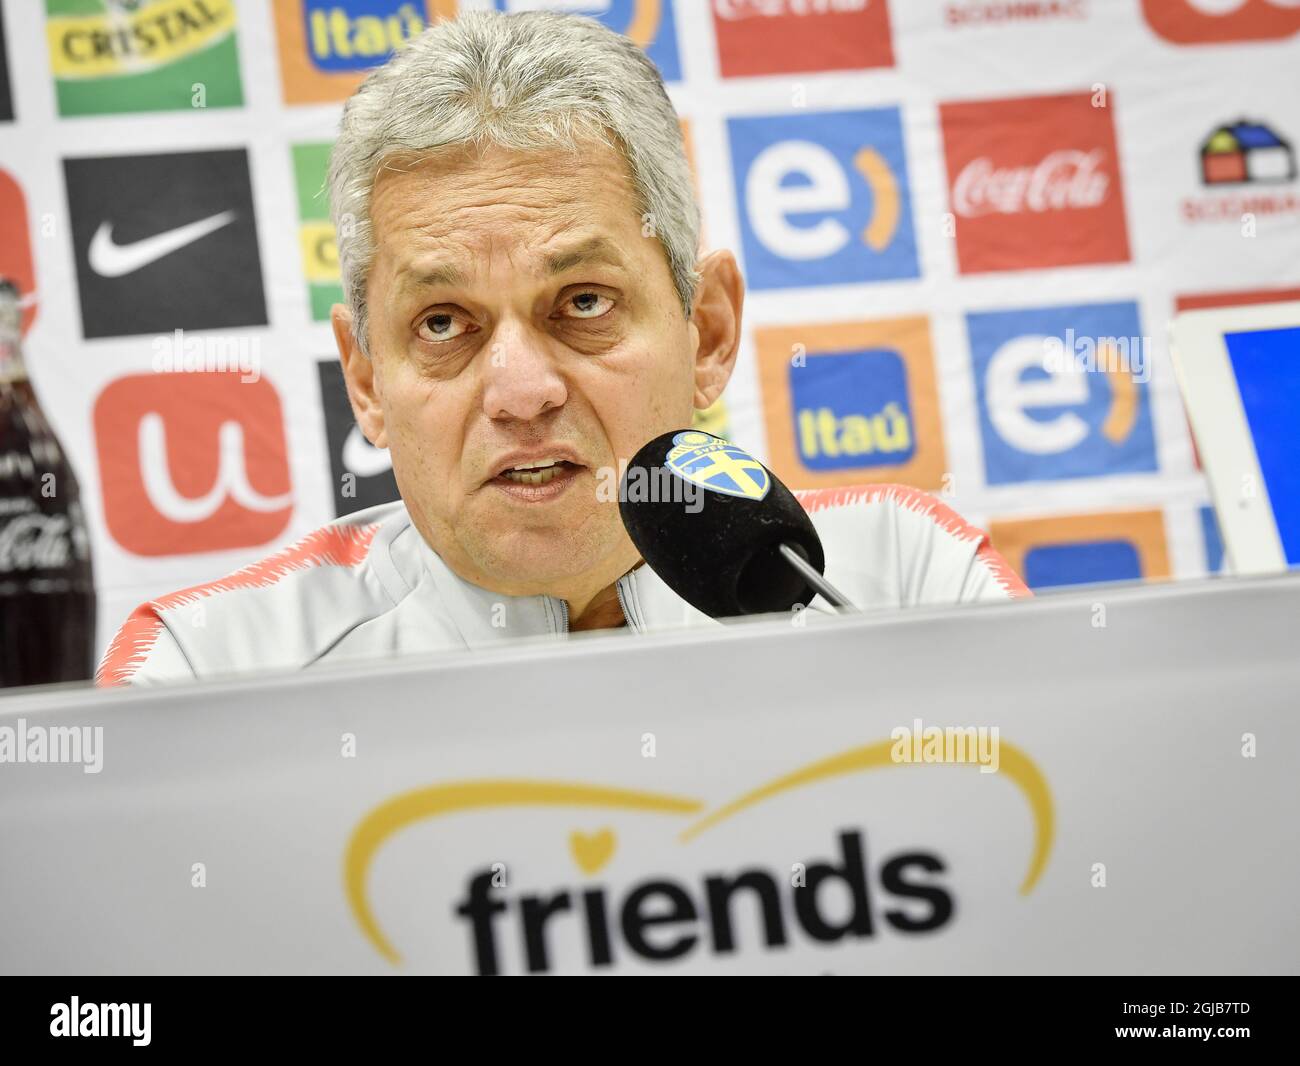 Chile's national soccer team coach Reinaldo Rueda speaks during a press conference at Friends Arena in Stockholm, Sweden, on March 23, 2018. Chile will meet Sweden for a friendly game tomorrow, March 24. Photo: Jonas Ekstromer / TT / code 10030  Stock Photo